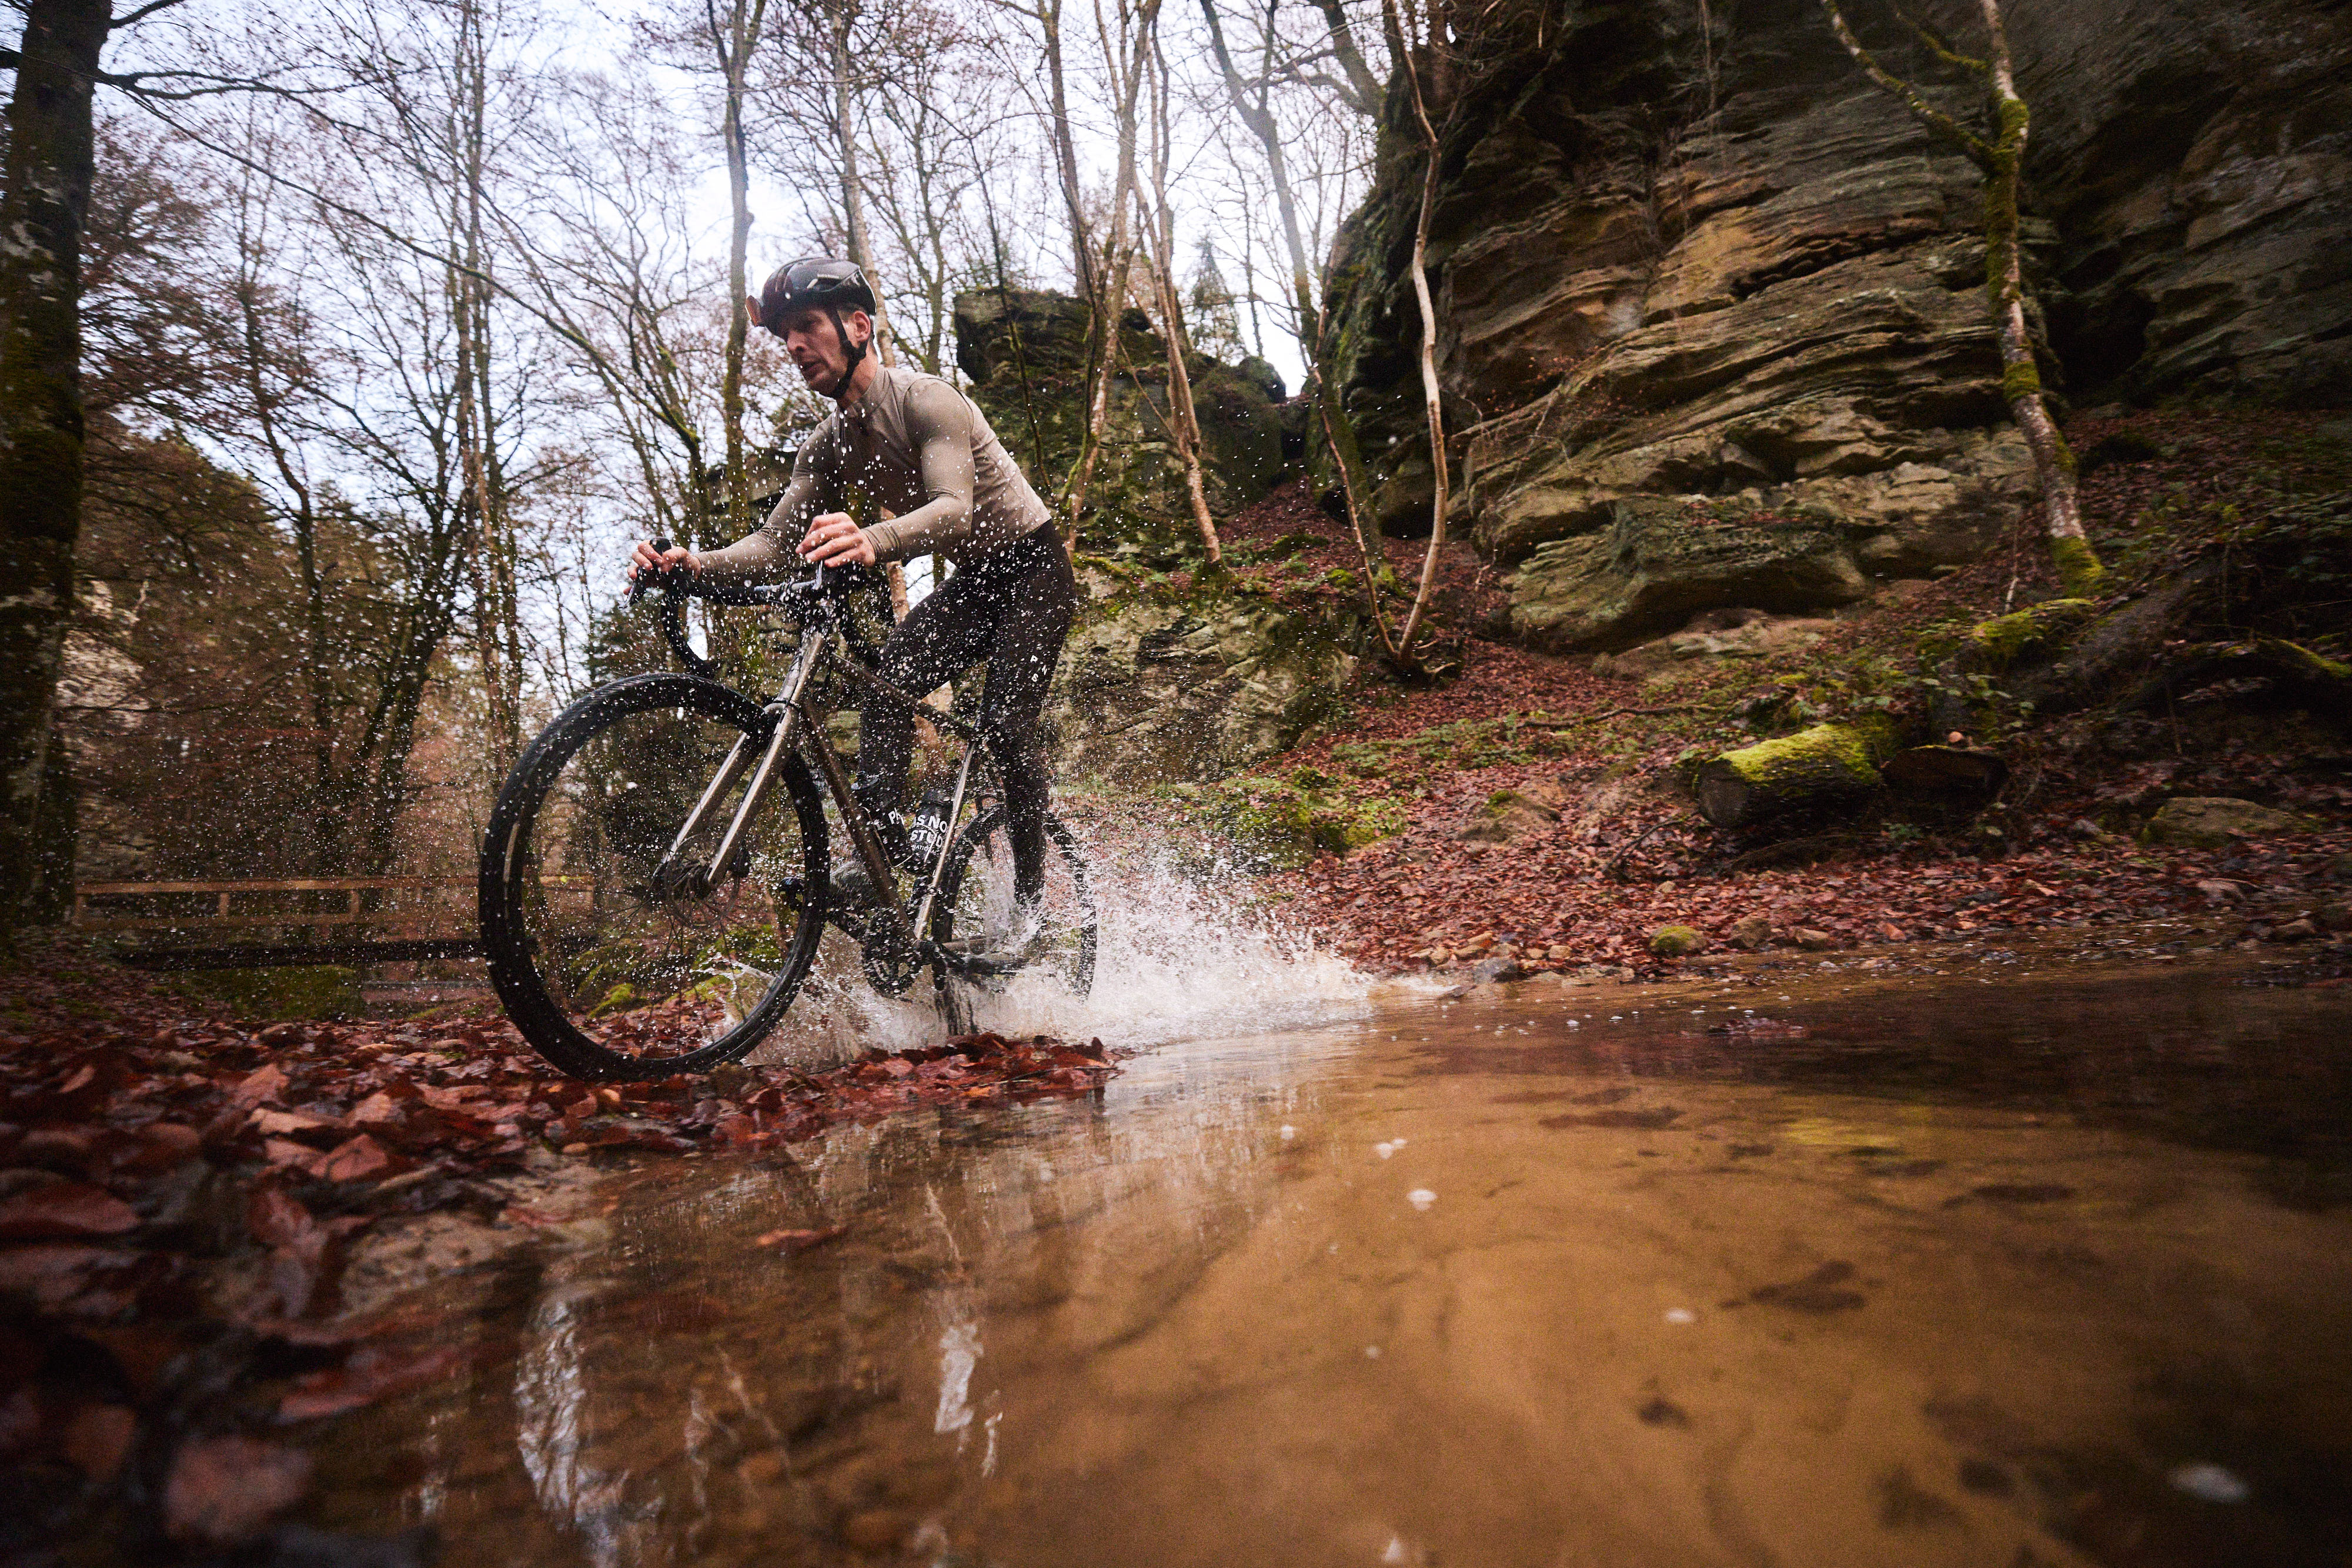 Gravel biker riding through muddy puddle in secluded forest